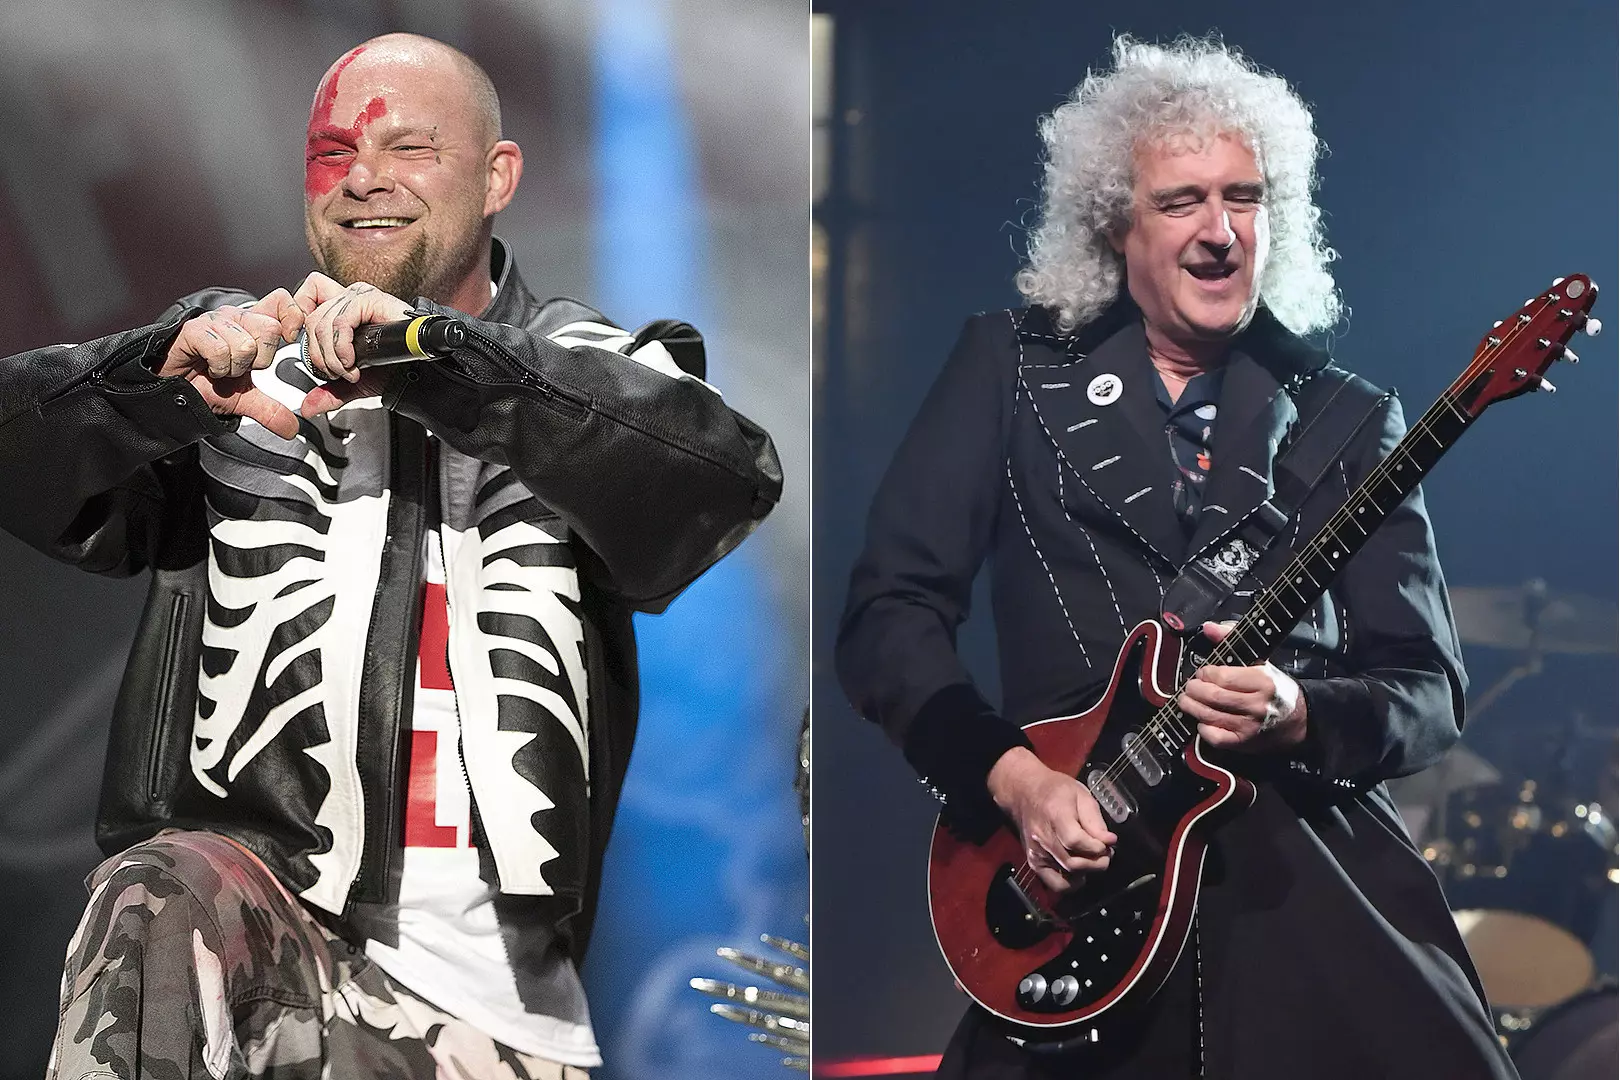 5FDP Tap Queen's Brian May, Country Star on 'Blue on Black' Cover